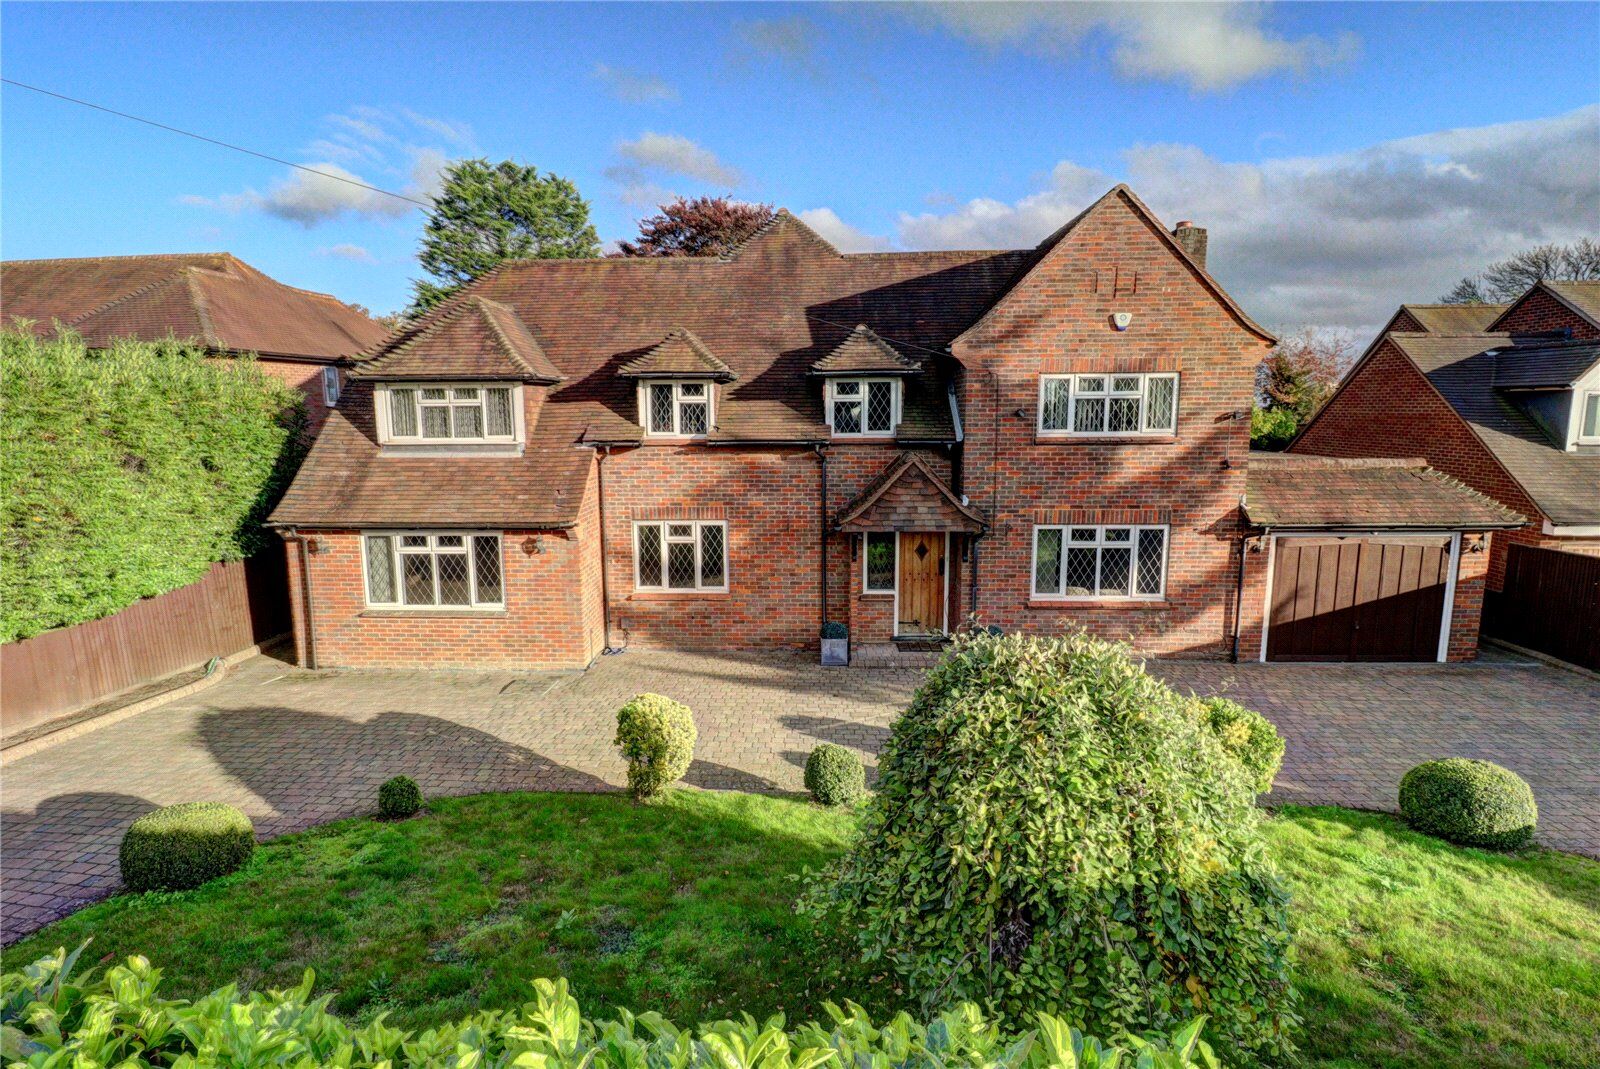 6 bedroom detached house for sale Marlow Road, High Wycombe, HP11, main image